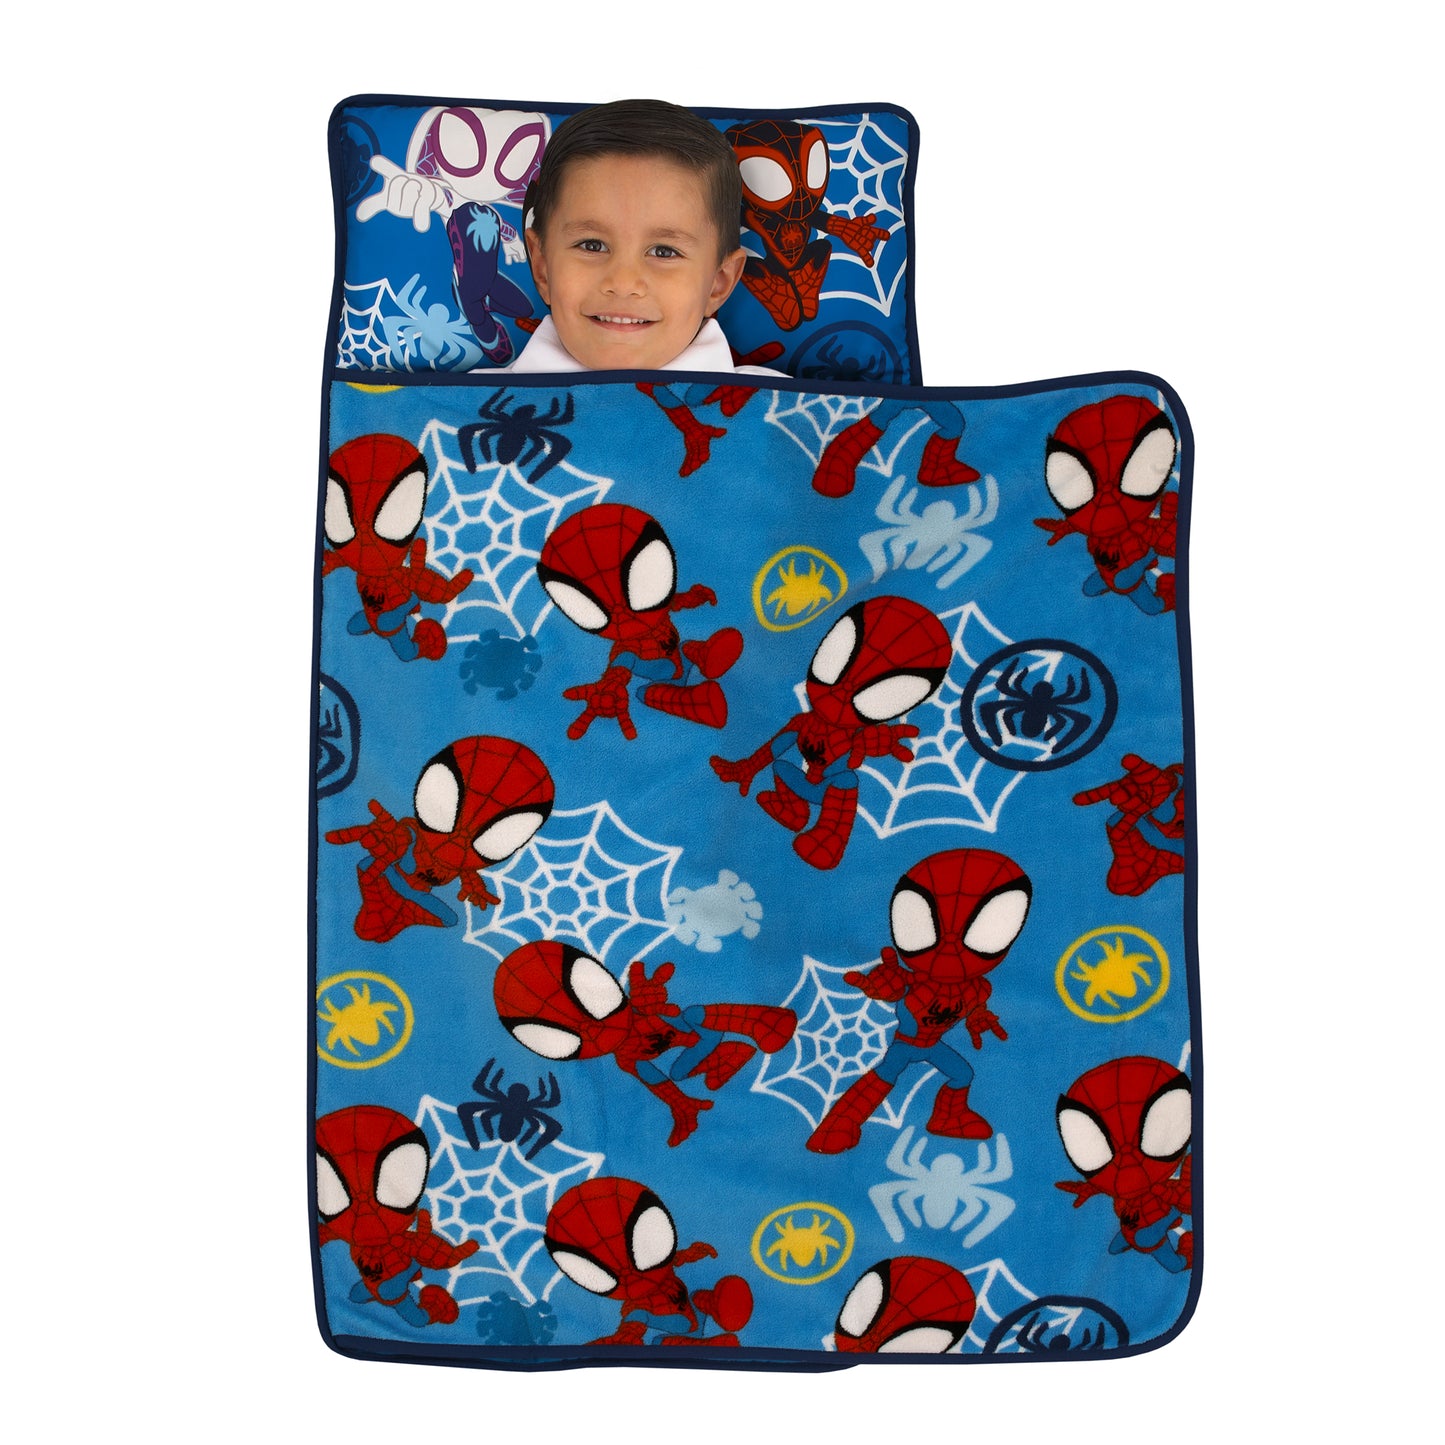 Marvel Spidey and His Amazing Friends Blue, Red and White Spidey Team Toddler Nap Mat